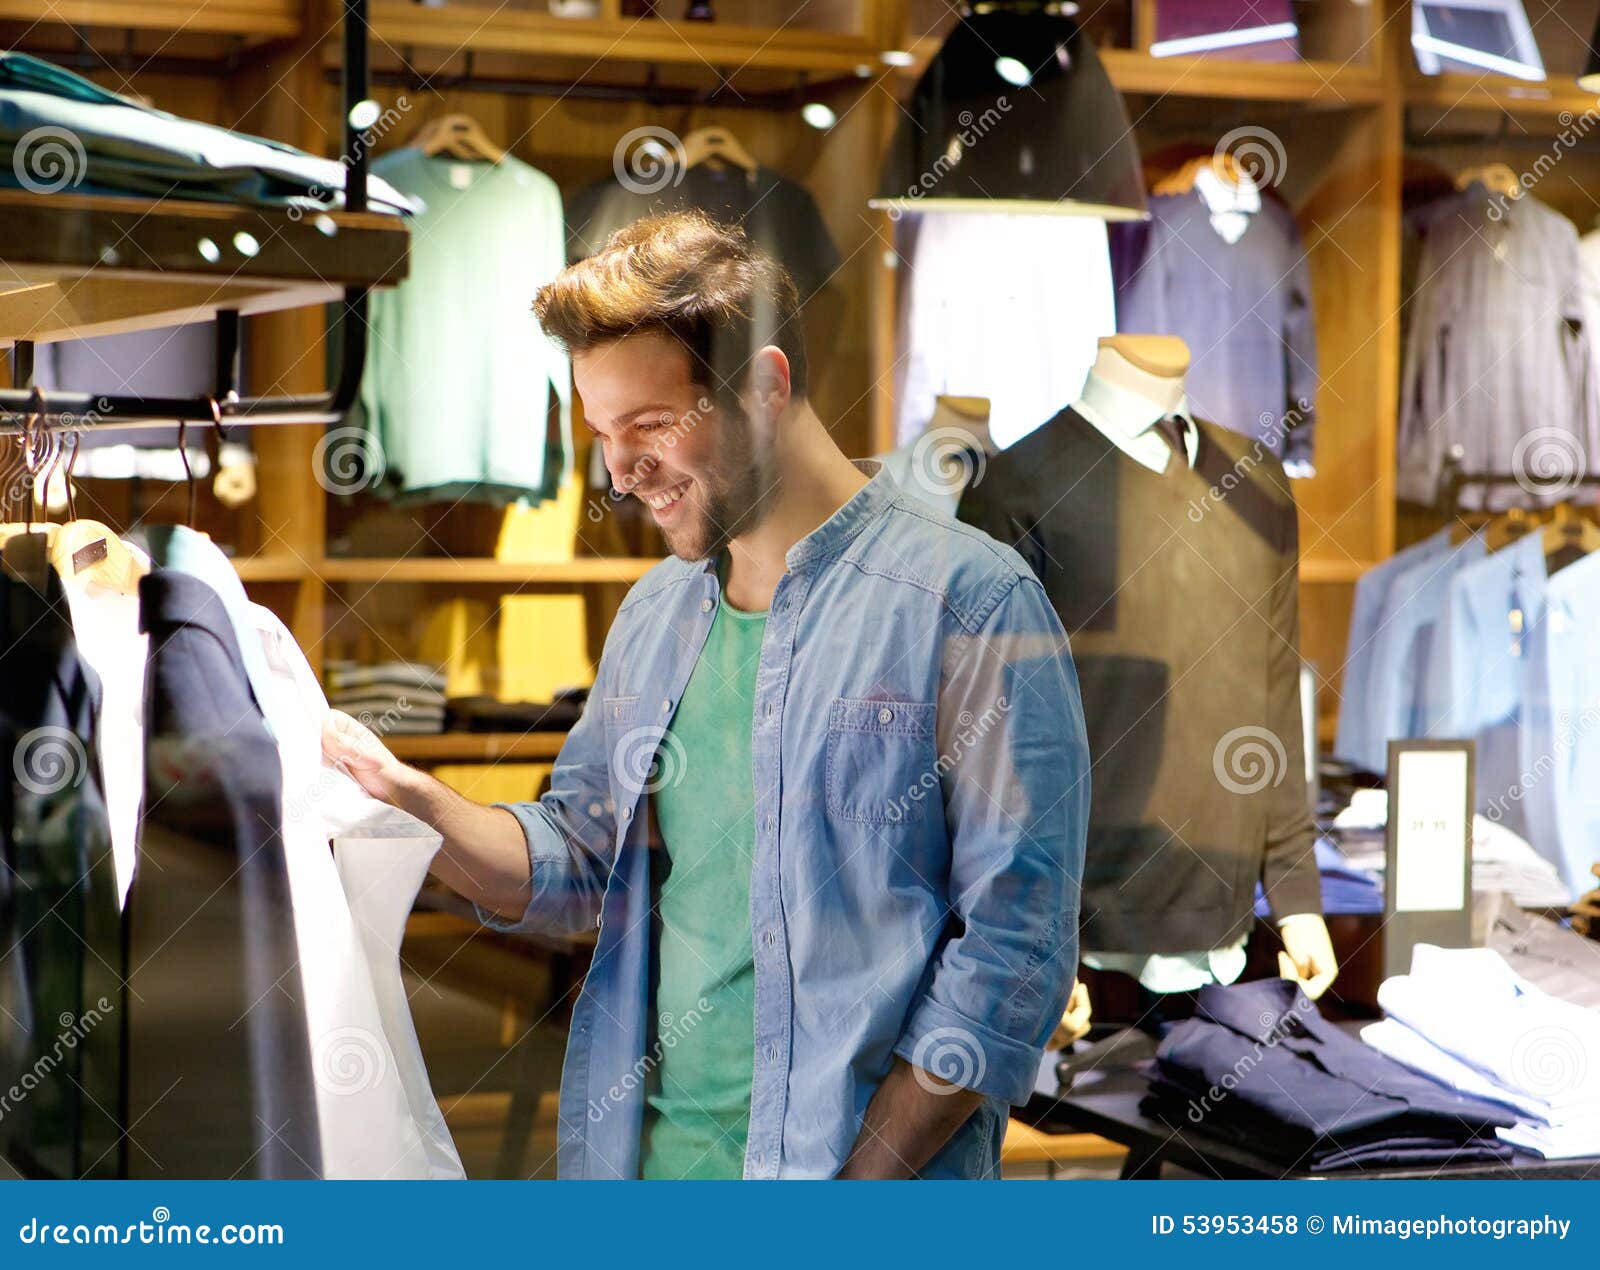 smiling man shopping for clothes at clothing store